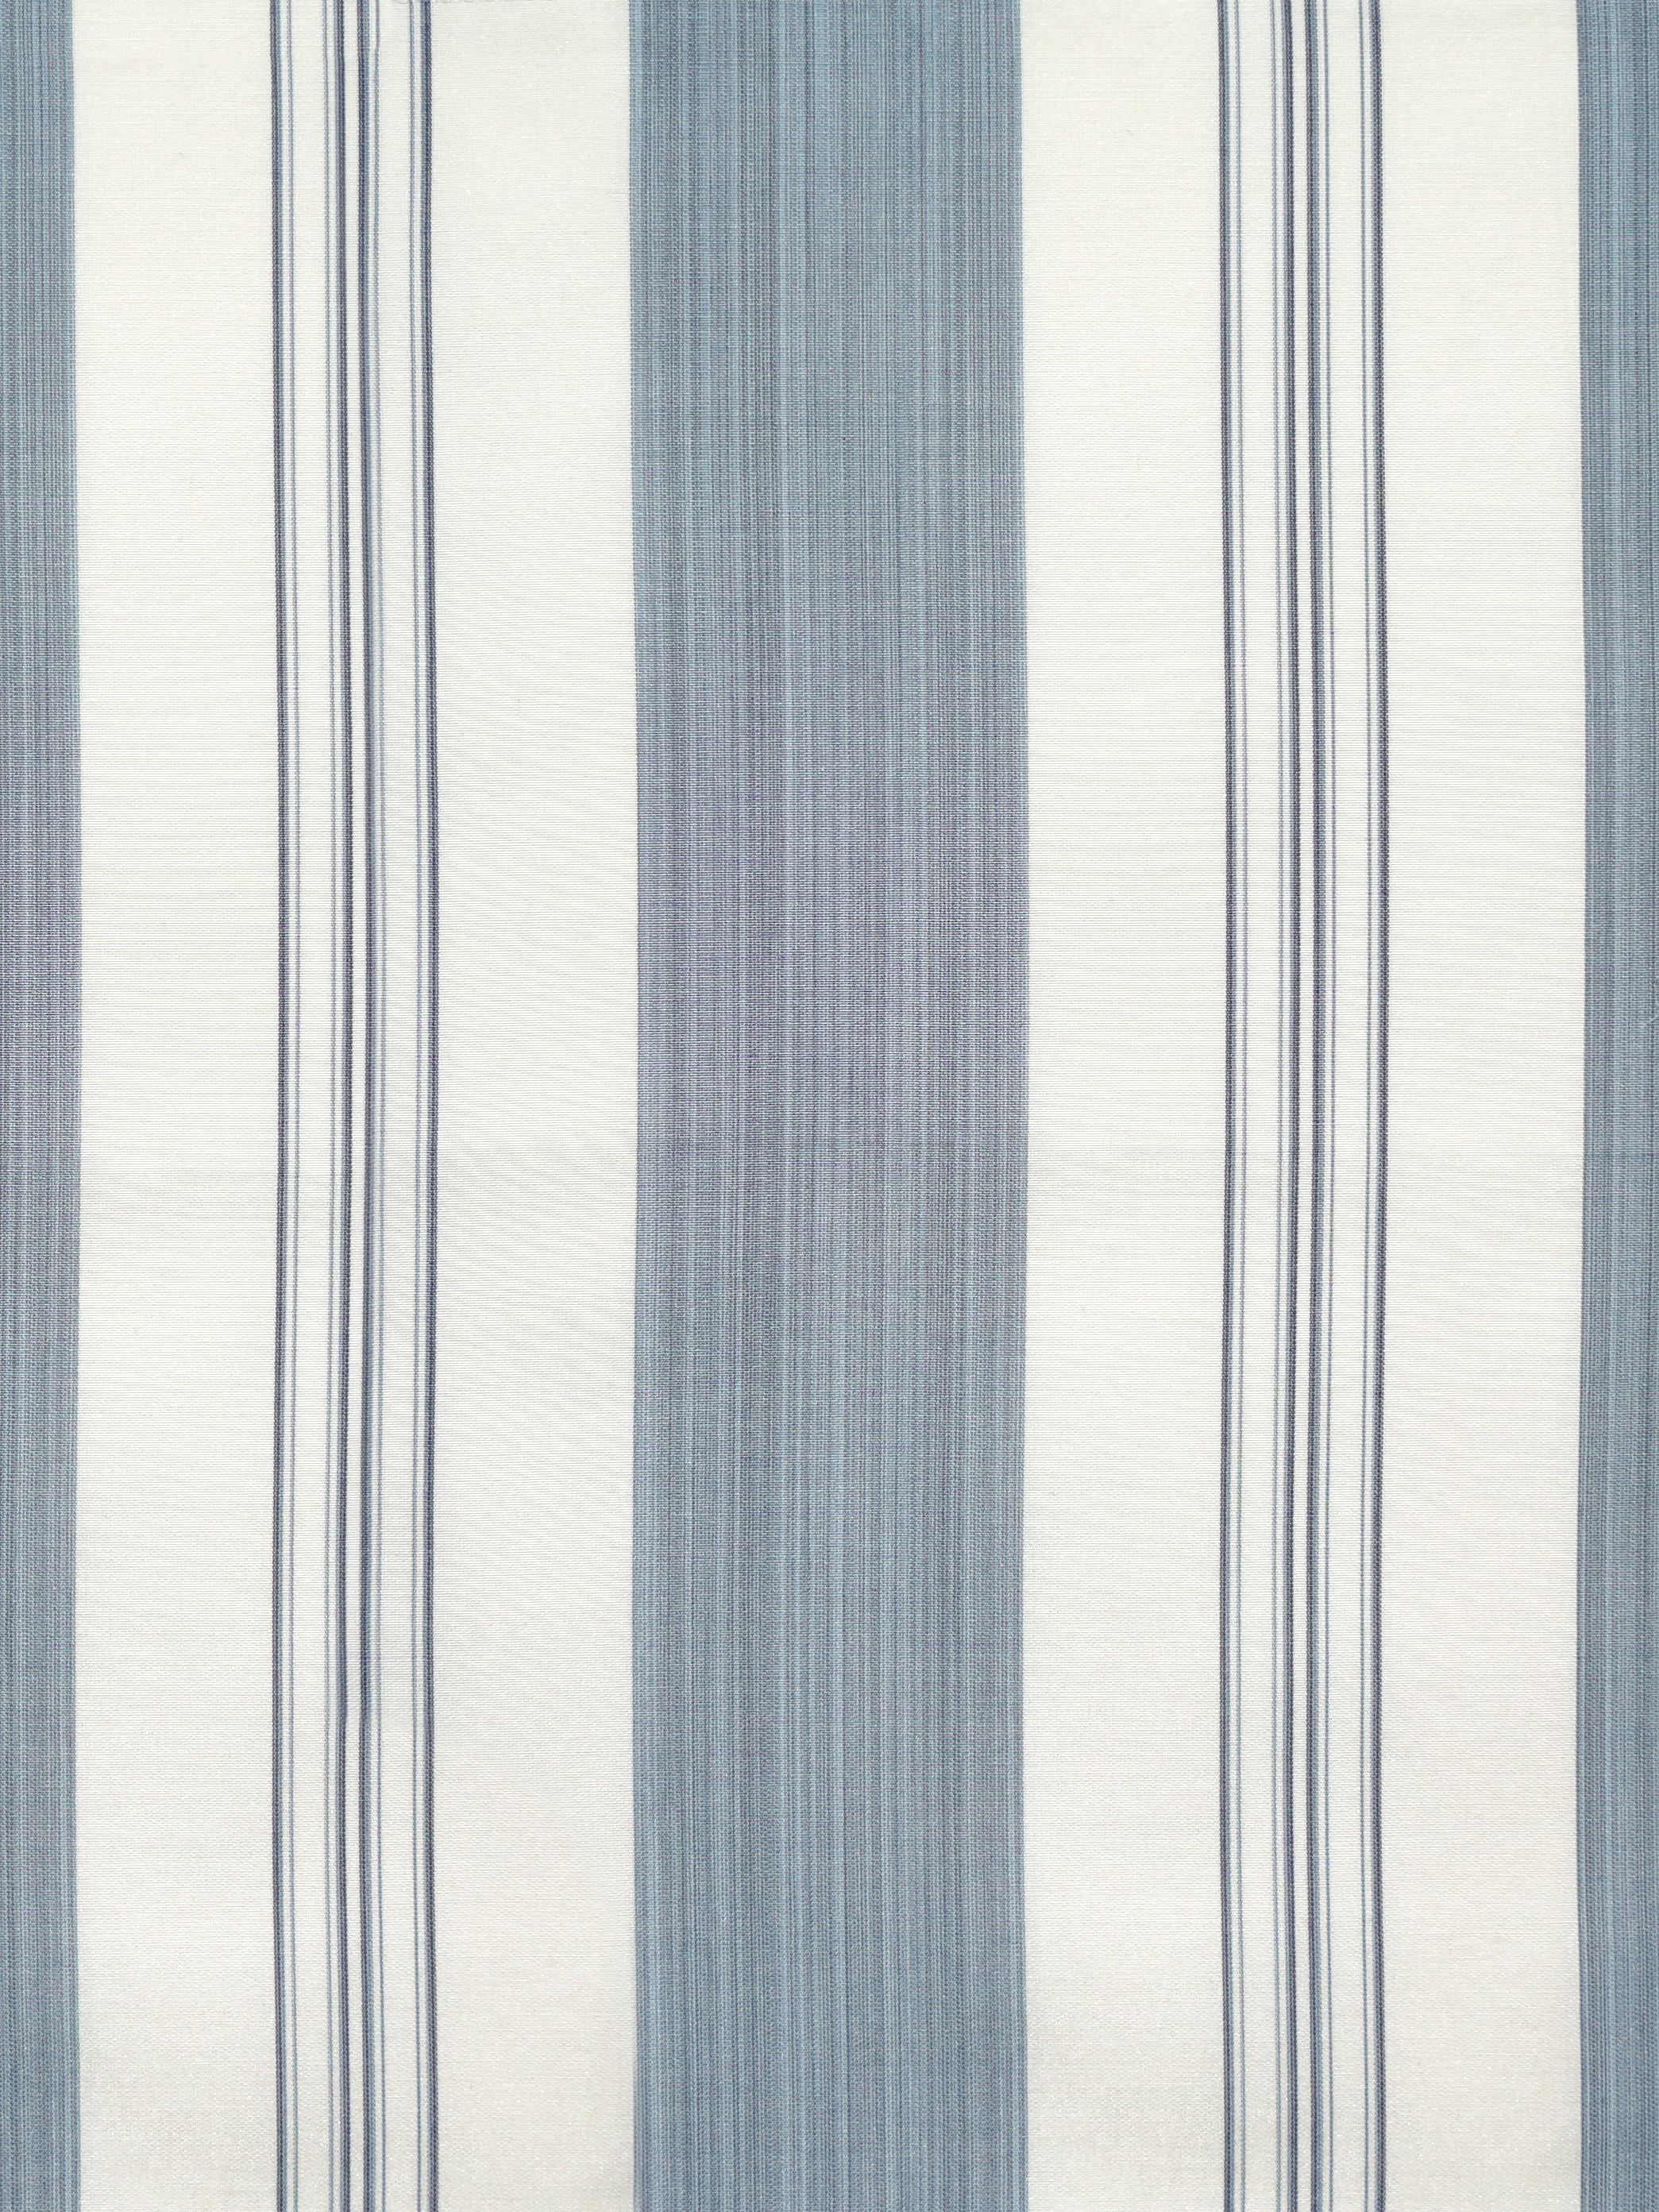 Astor Stripe fabric in indigo color - pattern number SC 000226982 - by Scalamandre in the Scalamandre Fabrics Book 1 collection